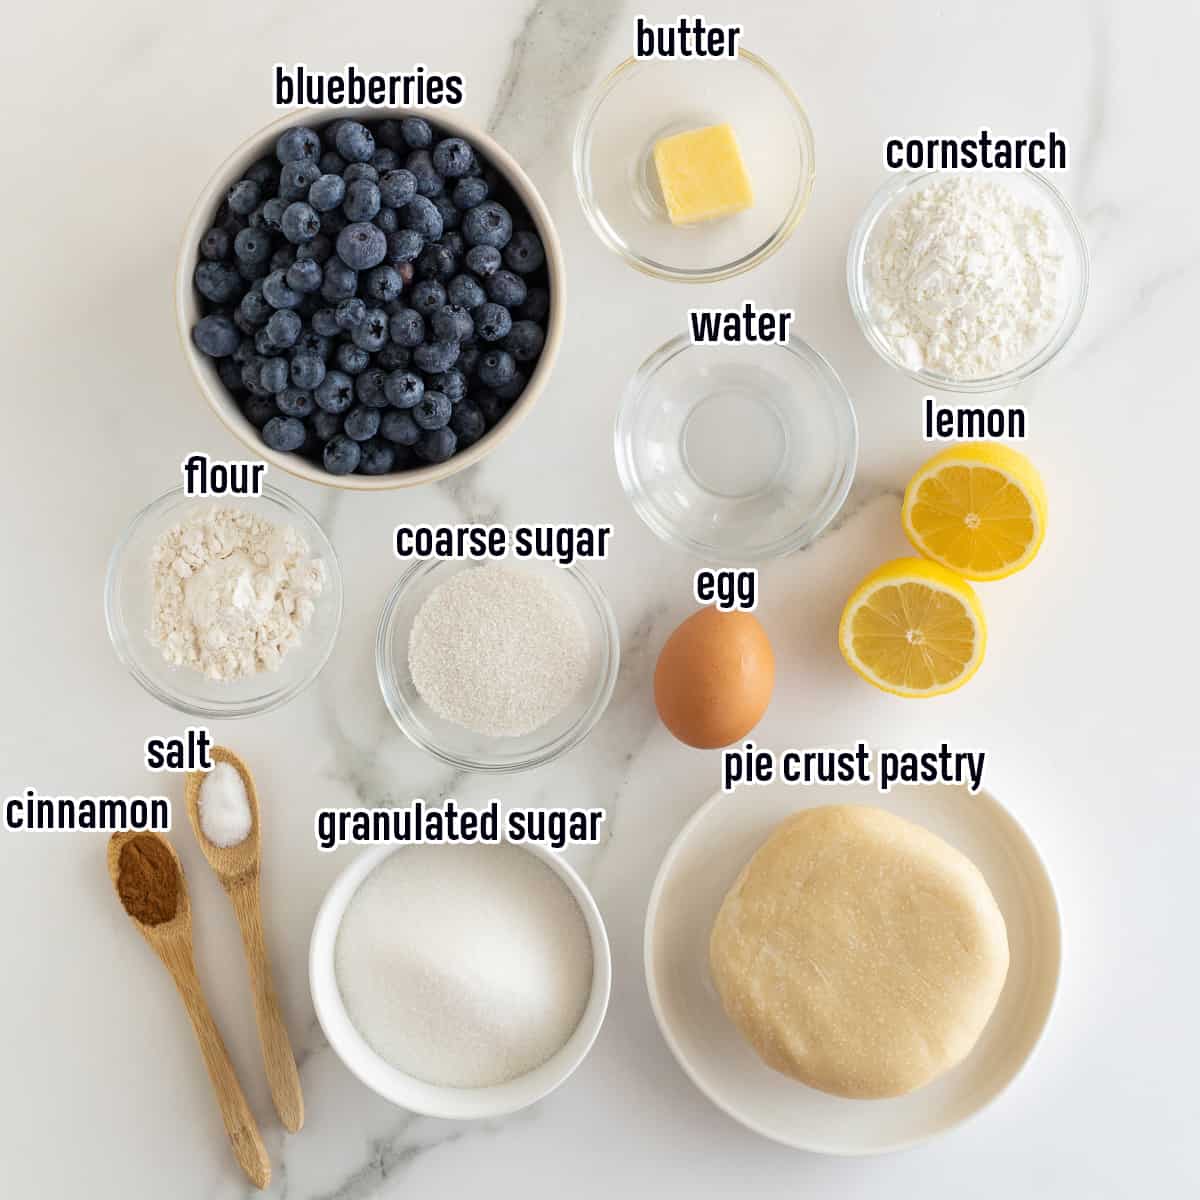 Blueberries, pie crust pastry and other ingredients in bowls with text.